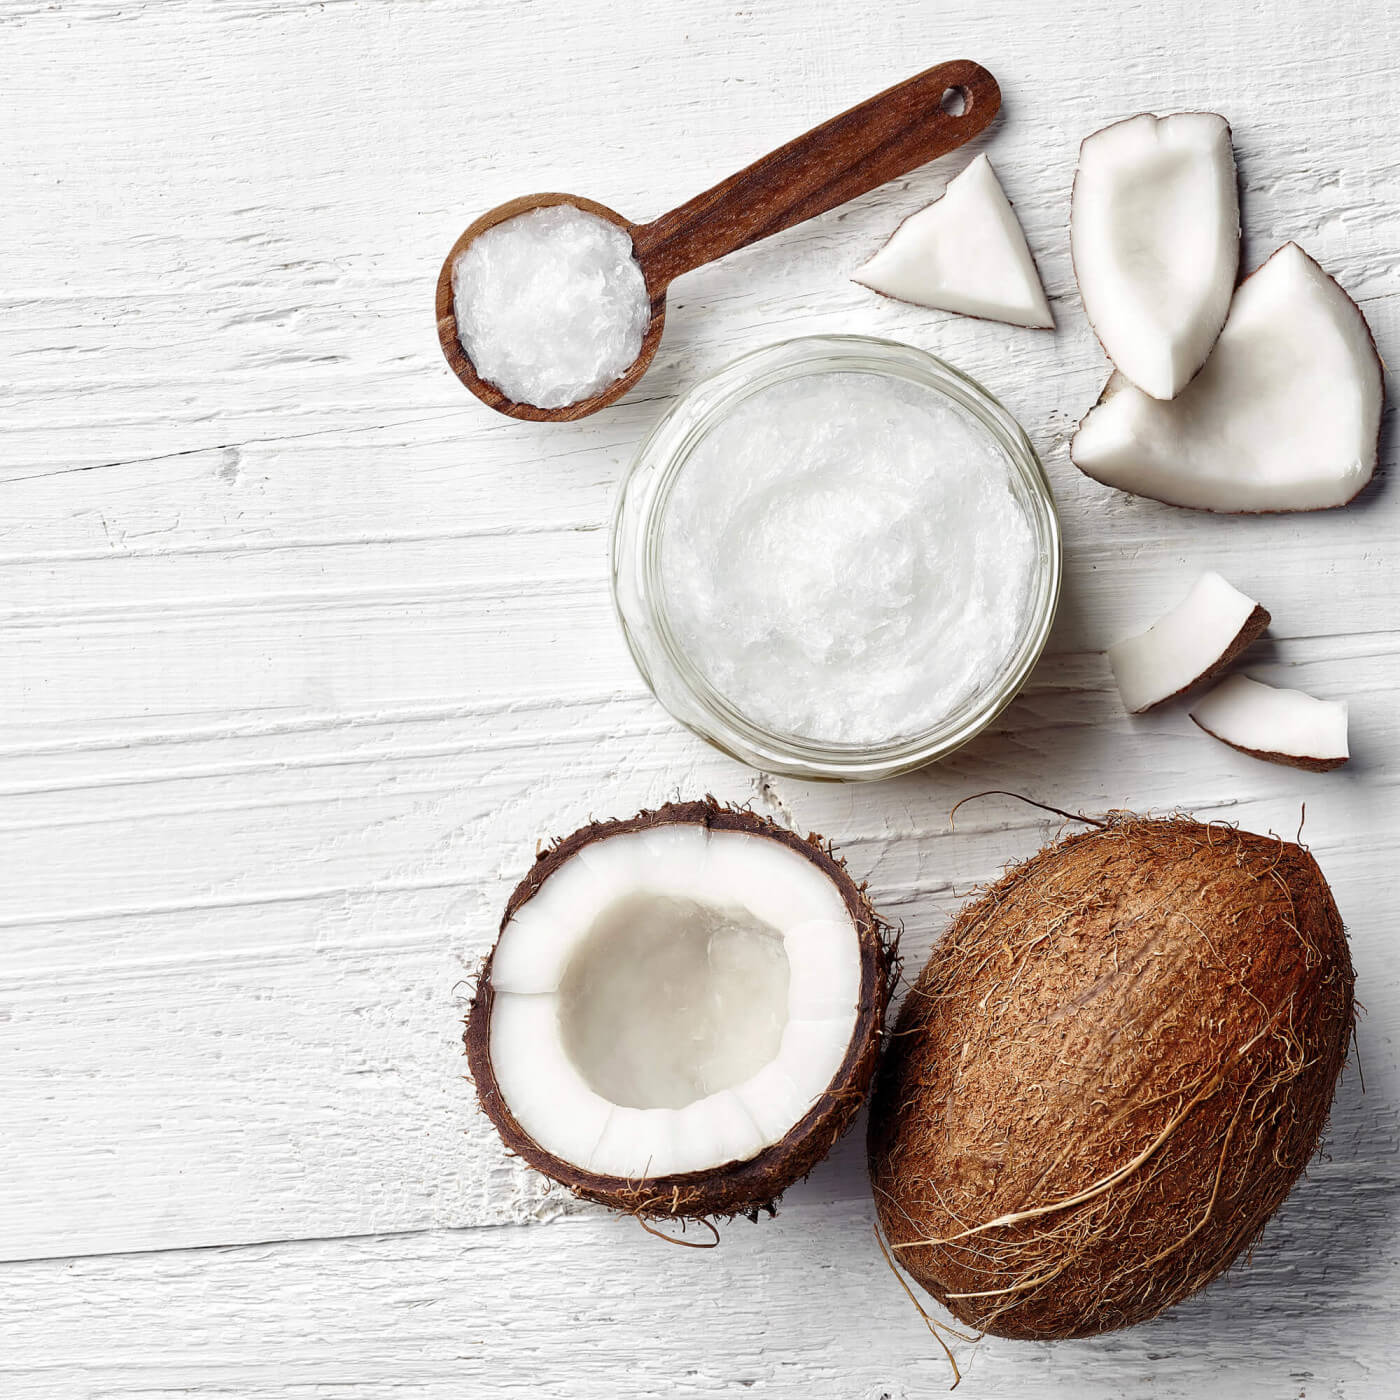 Choosing the Best Coconut Oil for Pulling